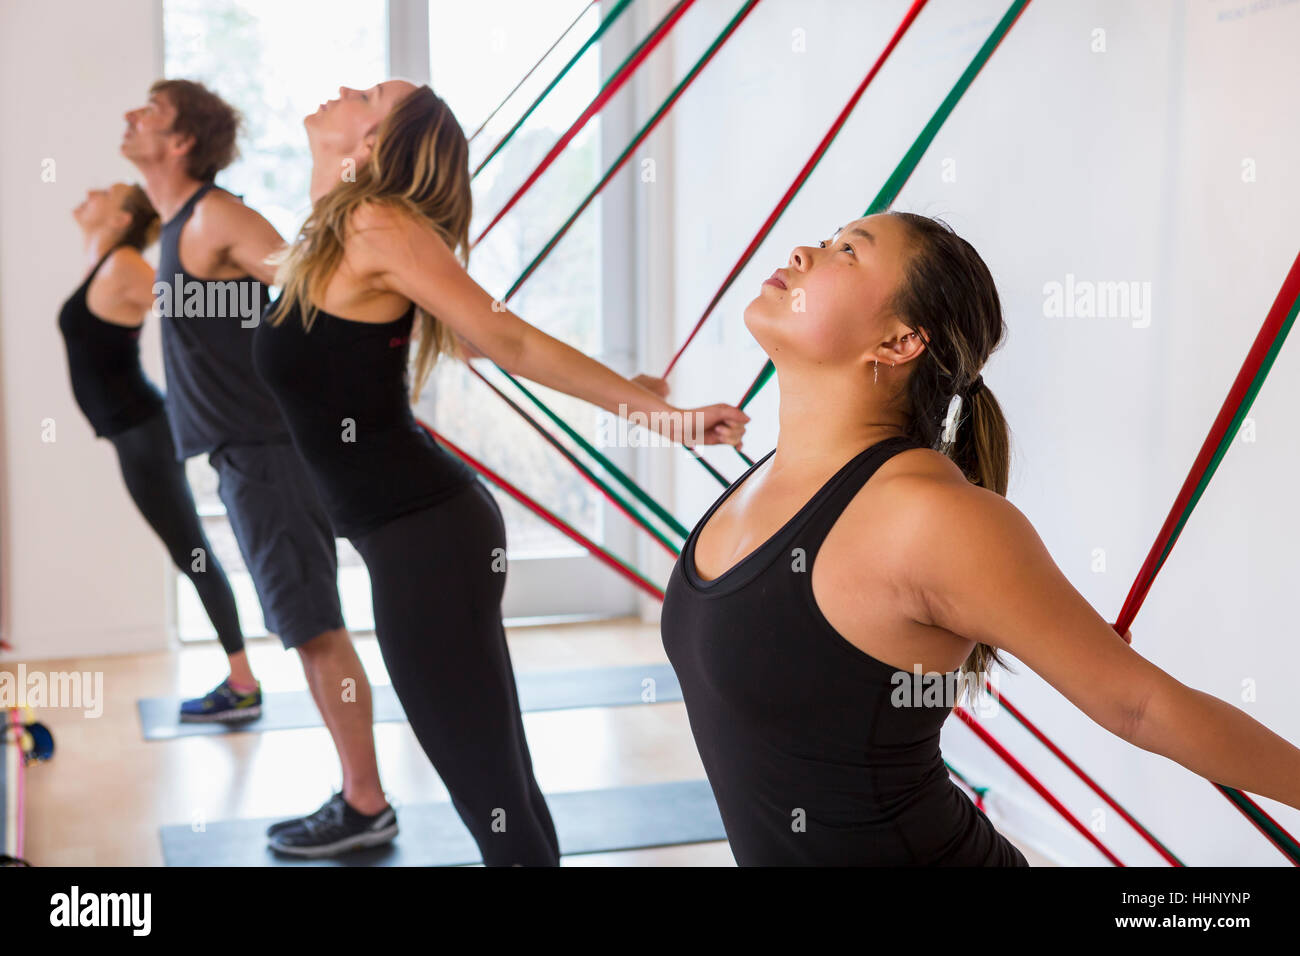 People pulling on resistance bands in gymnasium Stock Photo